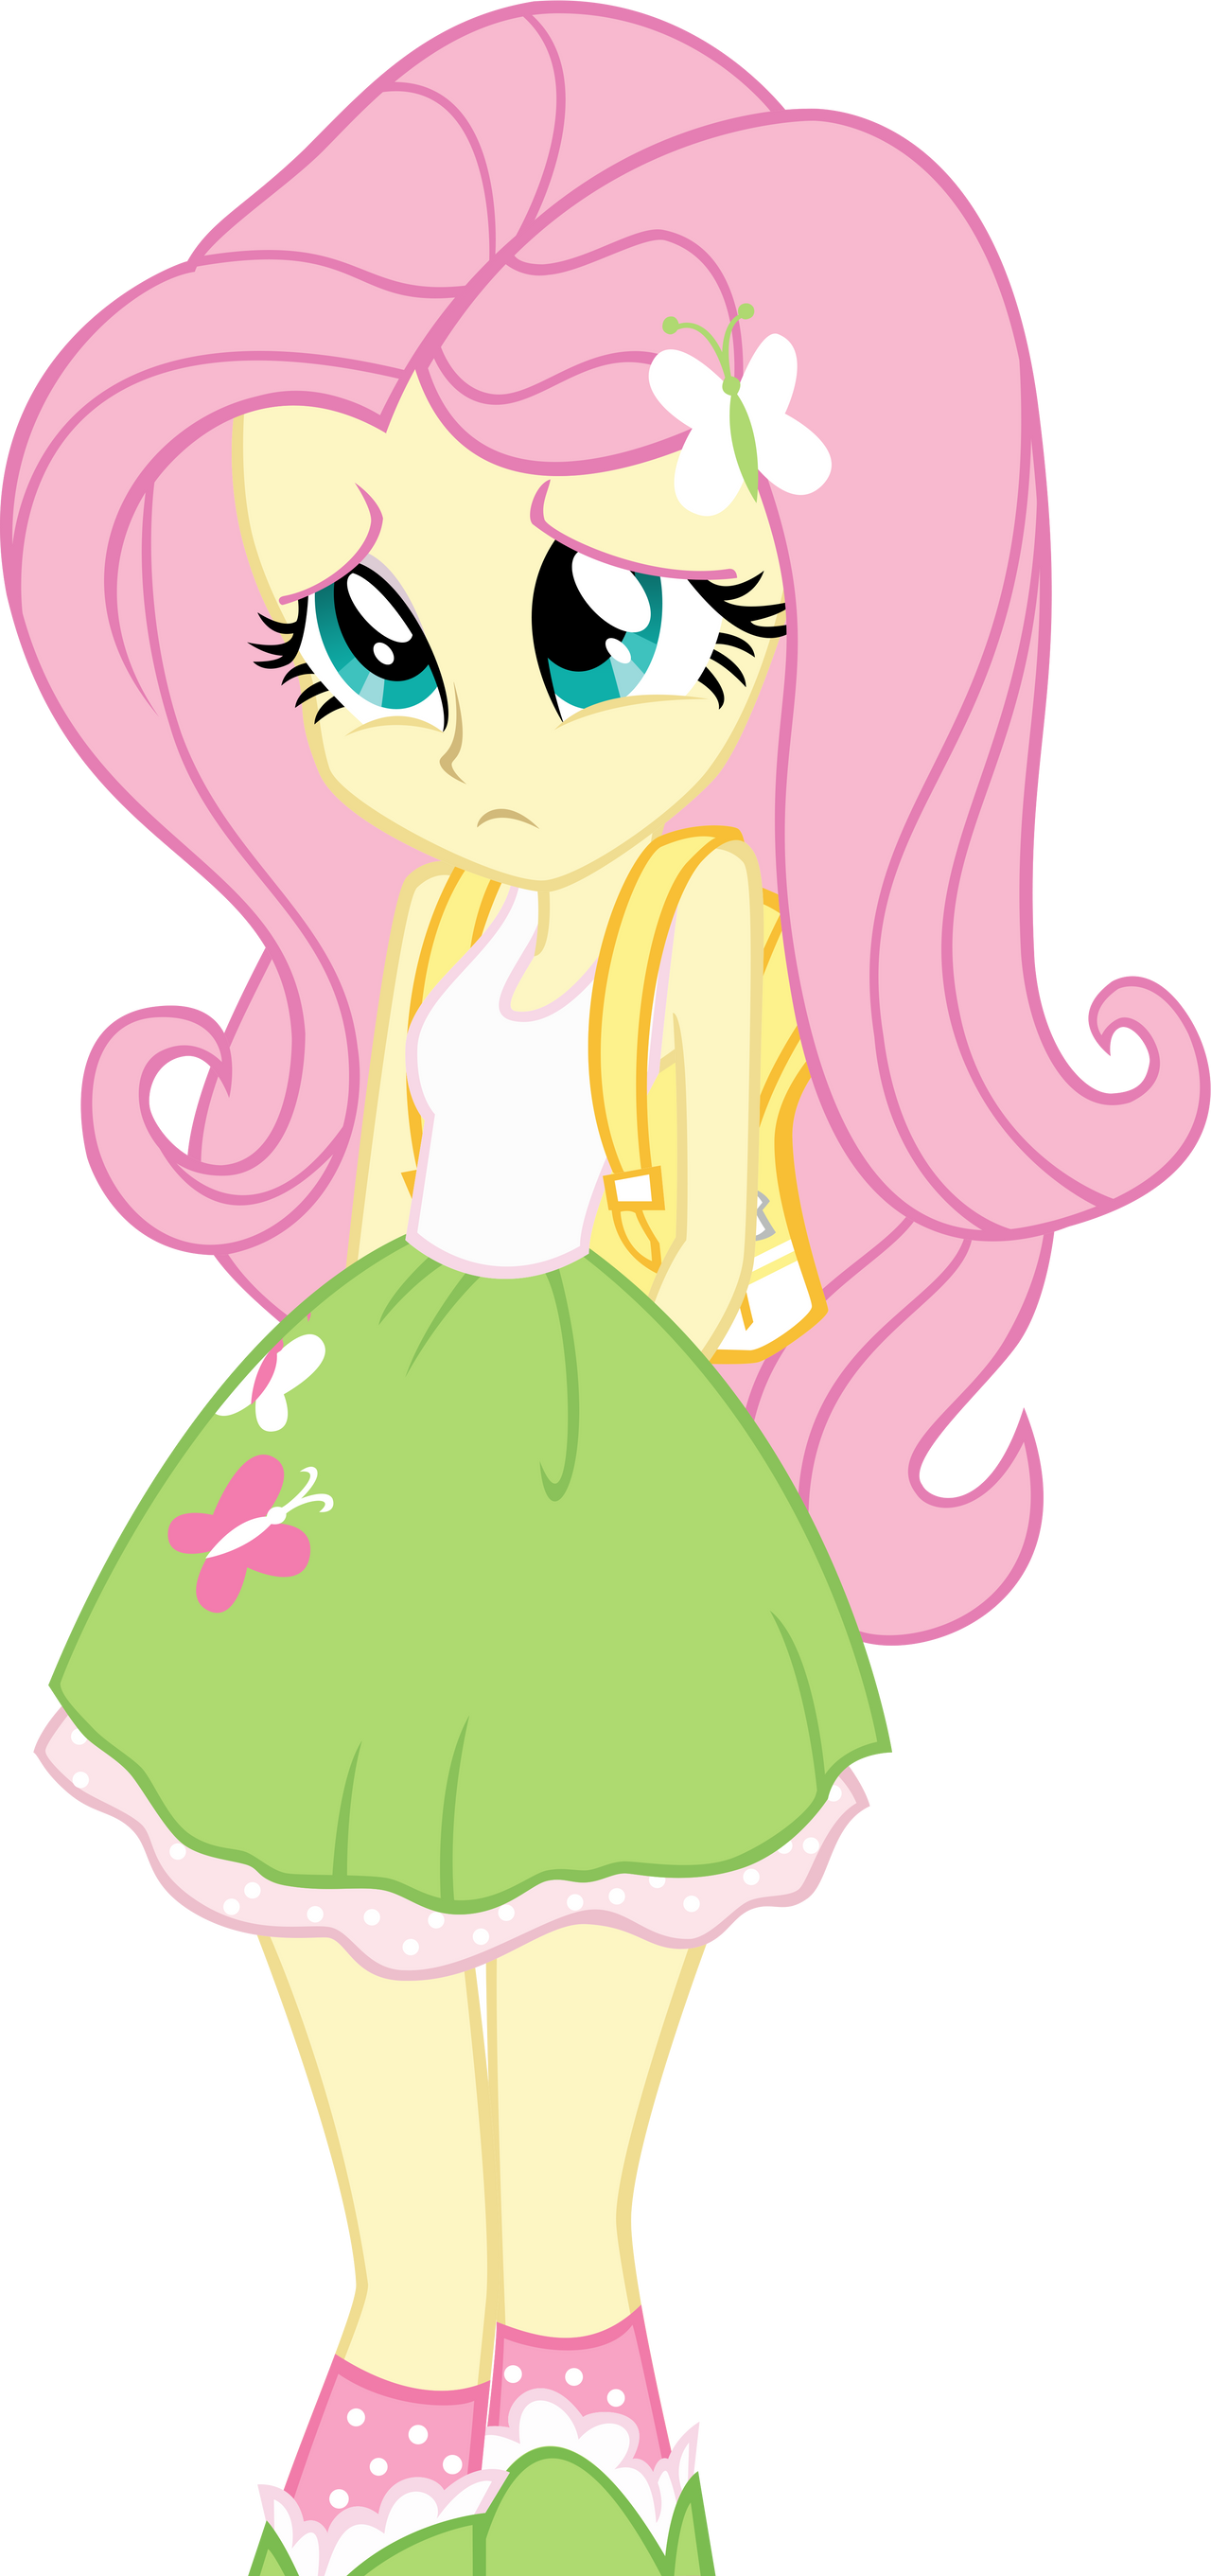 Fluttershy Images Dance Magic Fluttershy By Icantunloveyou 